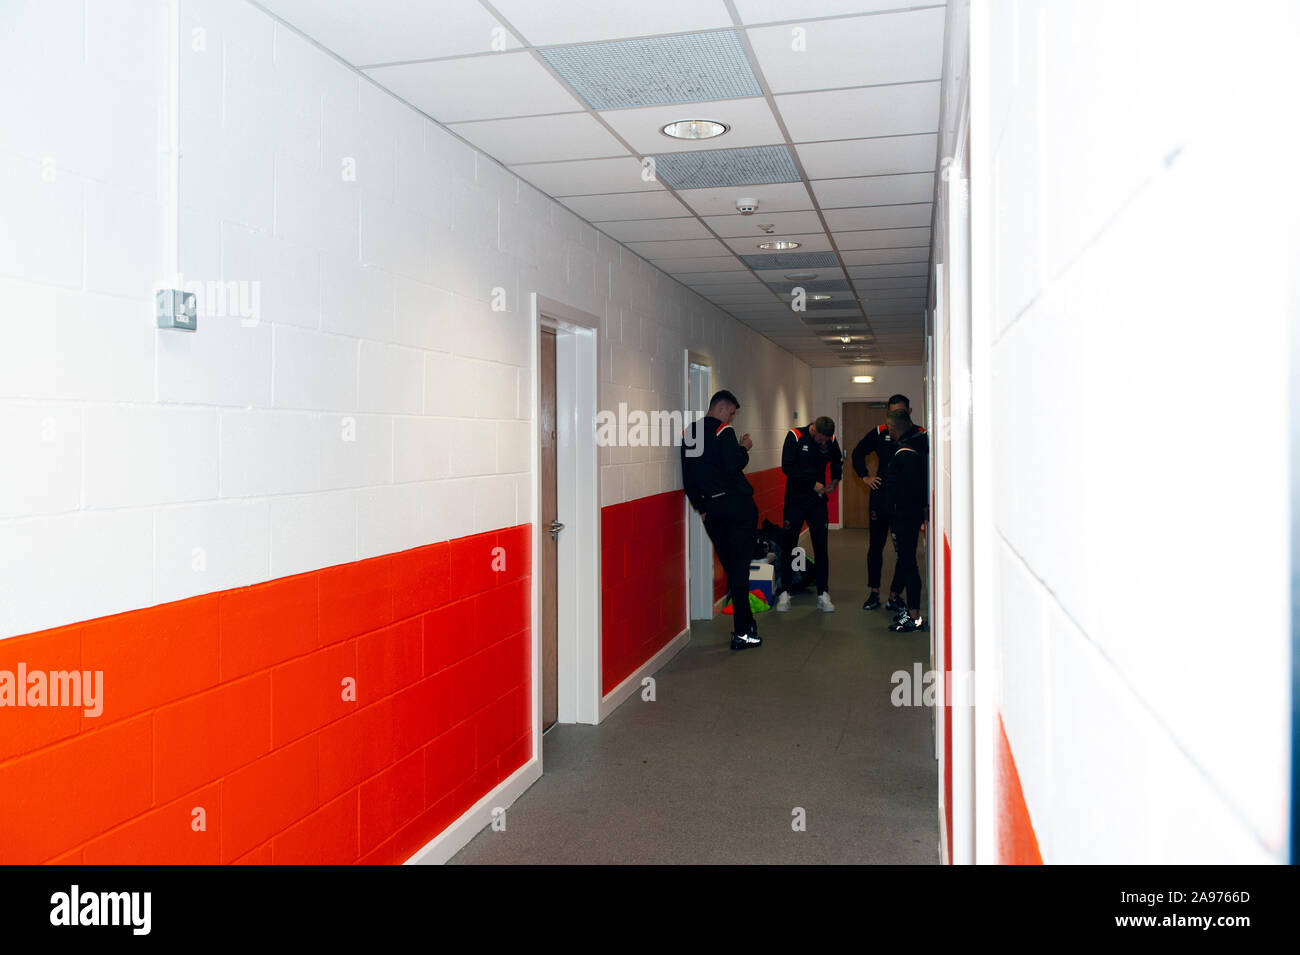 Football Players at Blackpool Football Club are waiting in the corridor for the match to start Stock Photo